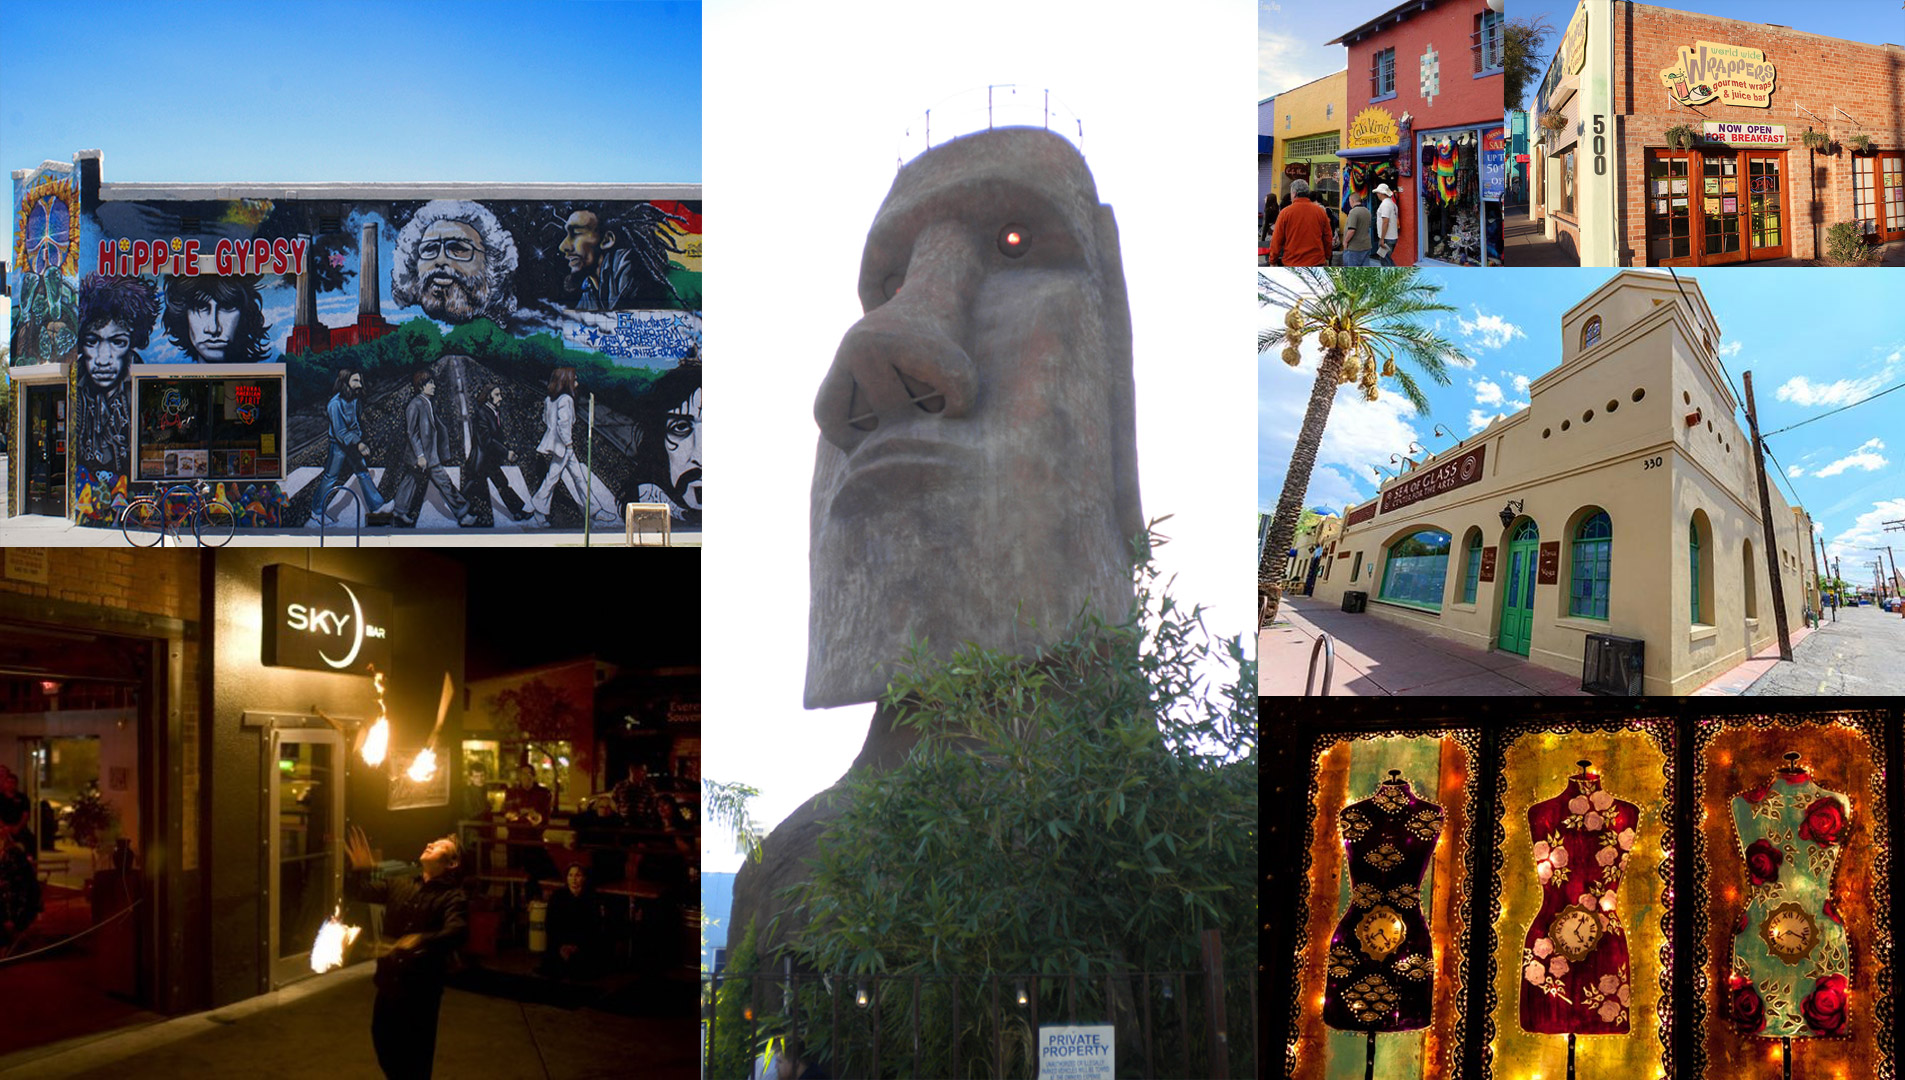 A collection of the sights from historic Fourth Avenue in Tucson, Arizona.